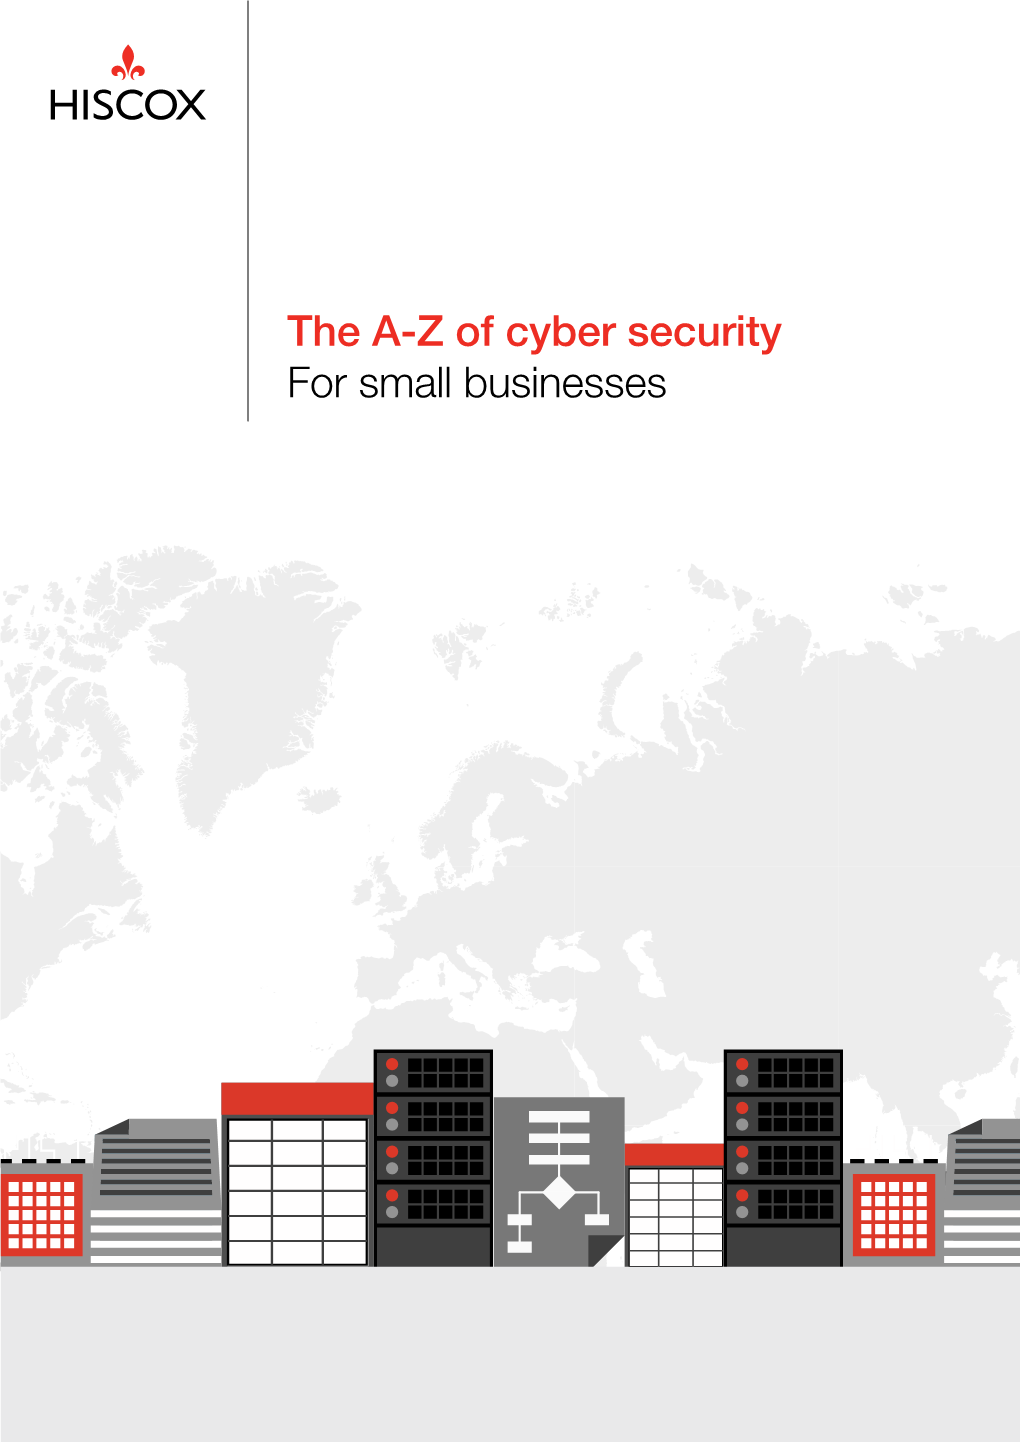 A-Z Cyber Security Guide | Hiscox UK